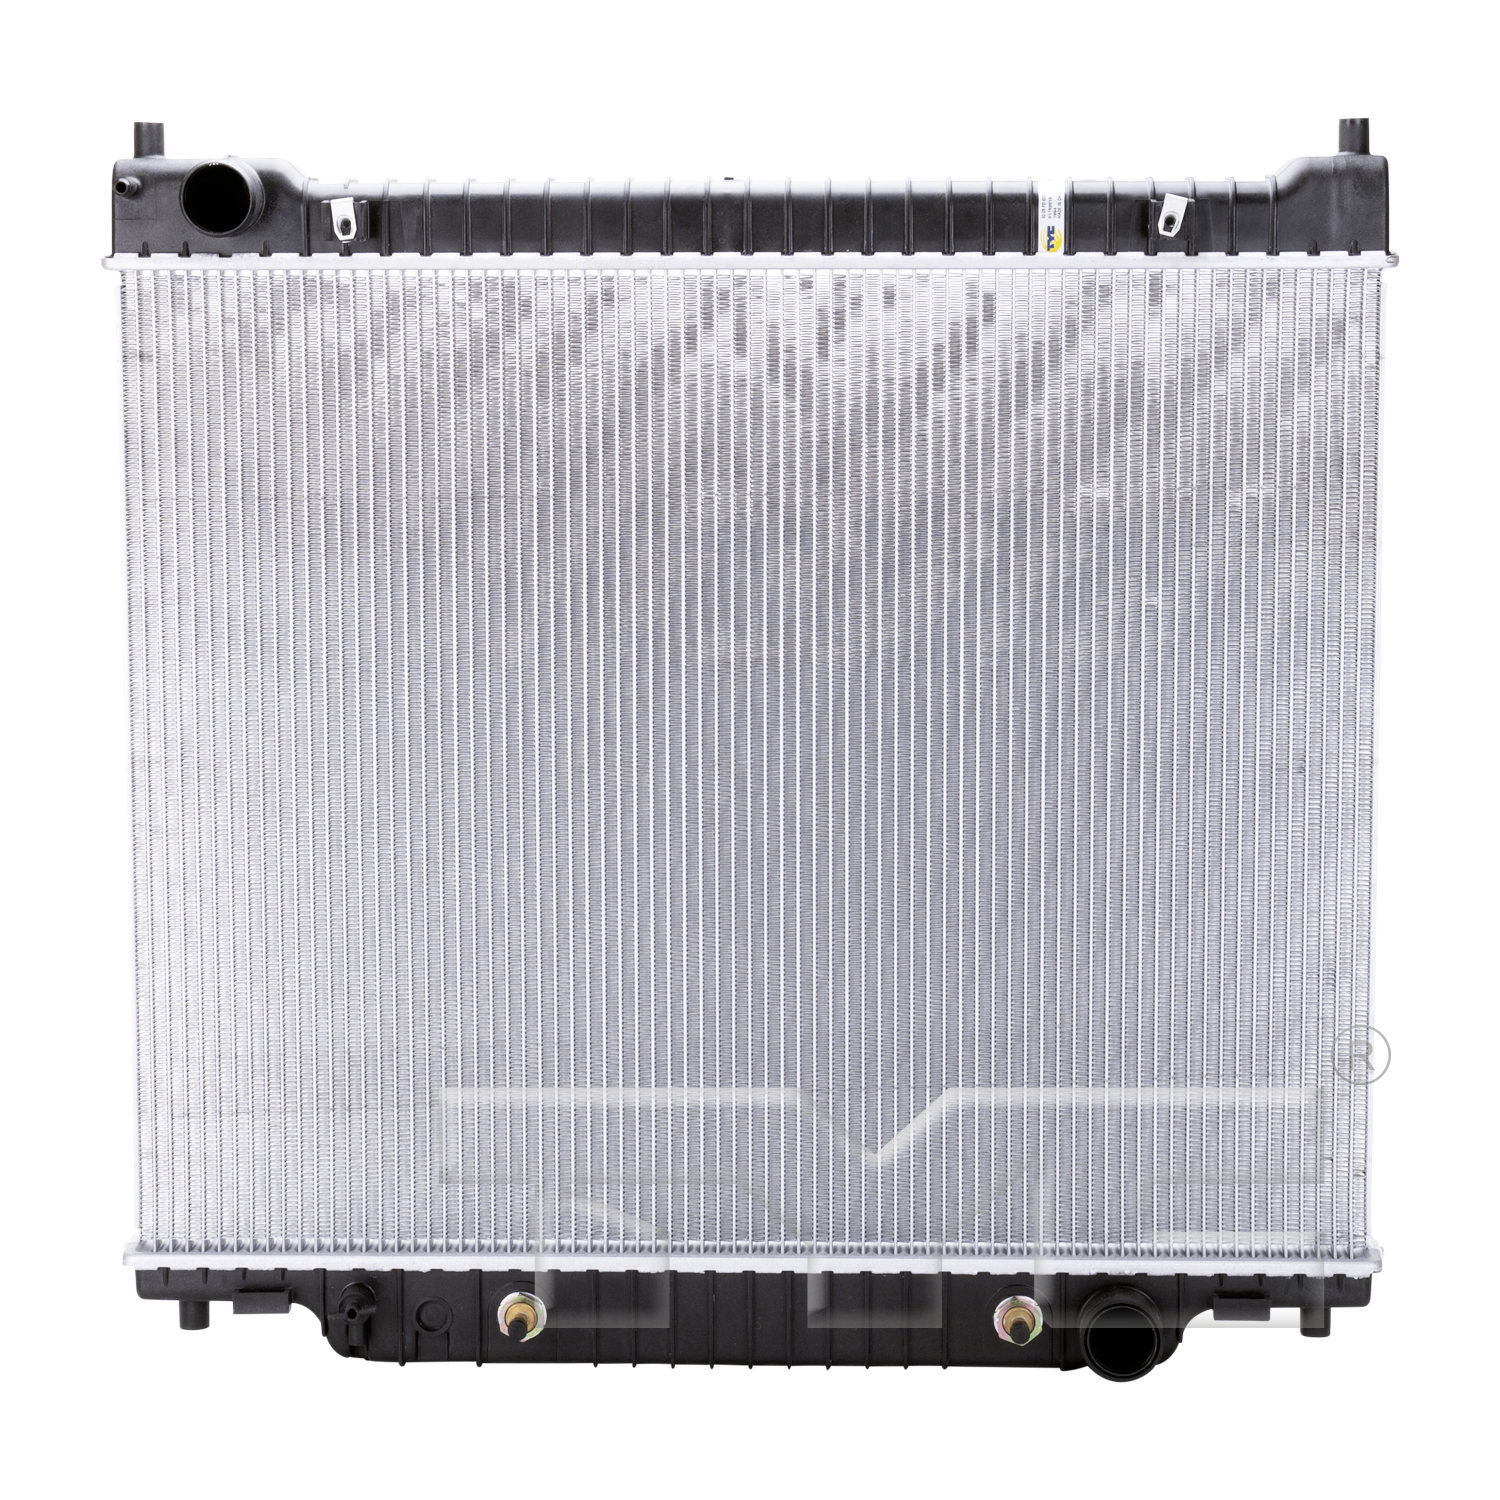 Aftermarket RADIATORS for FORD - E-150, E-150,03-06,Radiator assembly